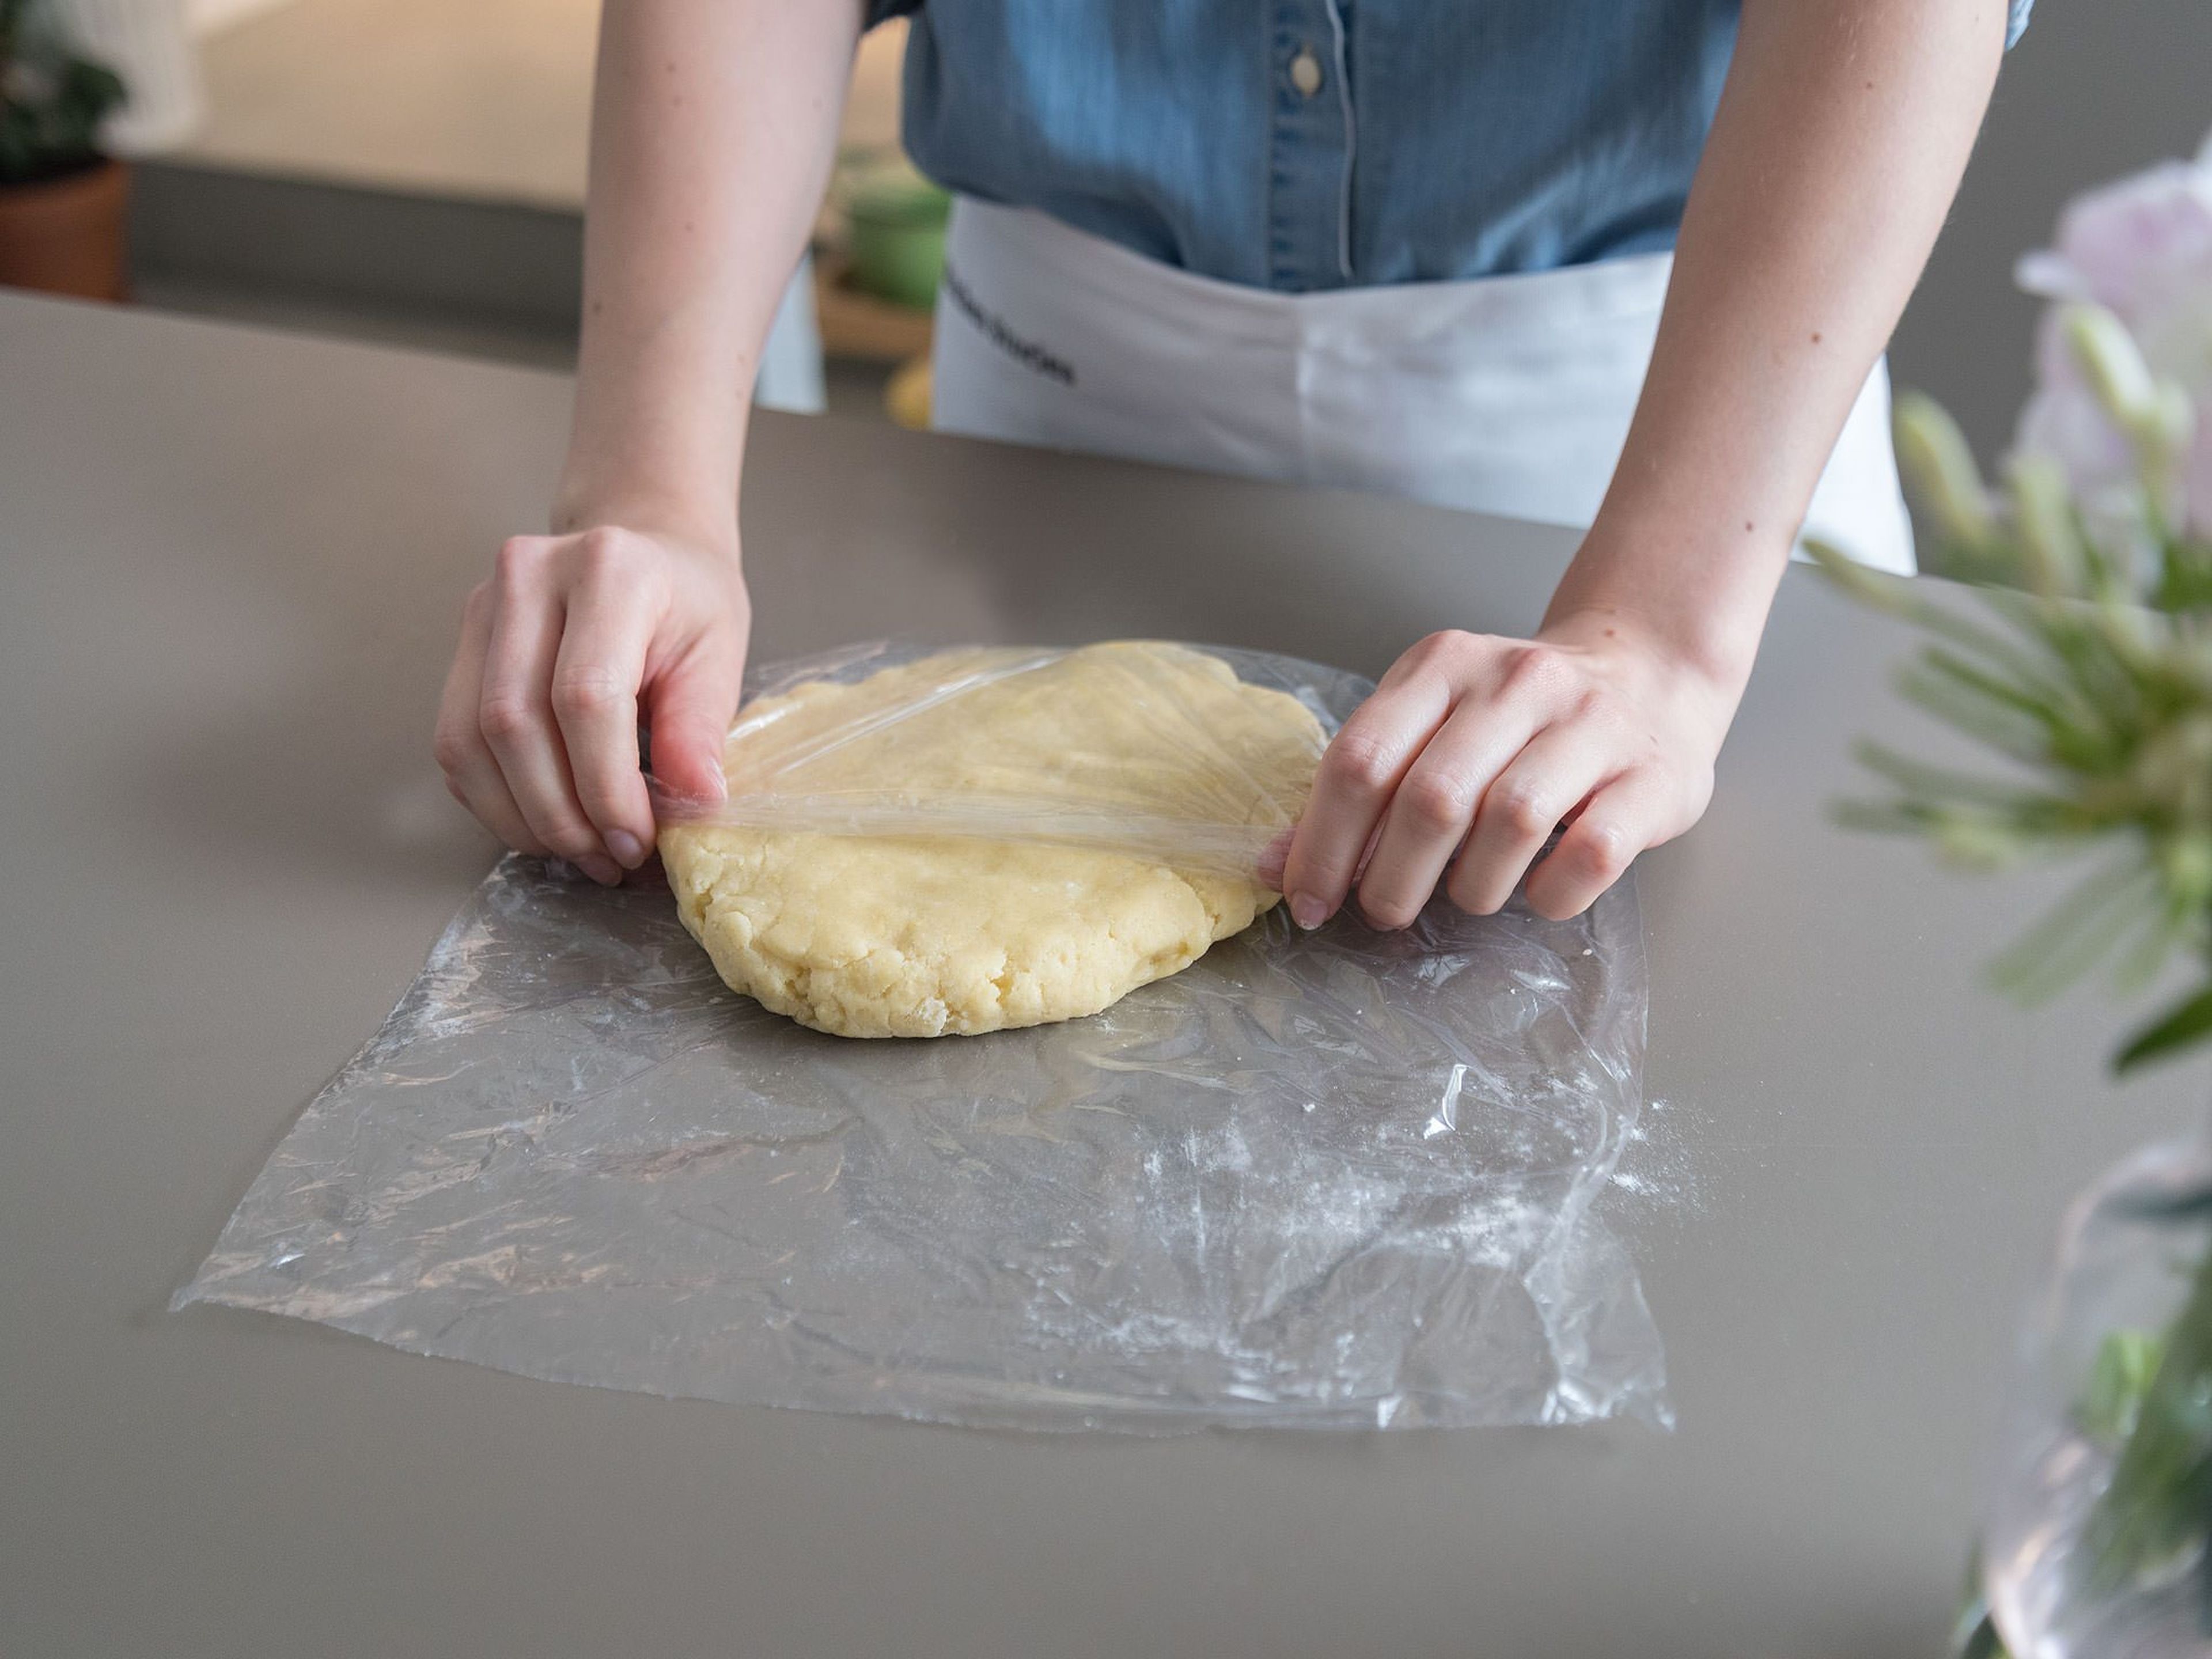 Add flour, baking powder, sugar, and salt to a large mixing bowl and stir to combine. Cut cold butter into cubes and work into flour mixture with dough scraper until butter is divided into pea-sized pieces. Add egg and continue mixing, bringing dough together using your hands. Form into a disc and wrap tightly in plastic wrap. Leave to chill for approx. 30 min. in the refrigerator.